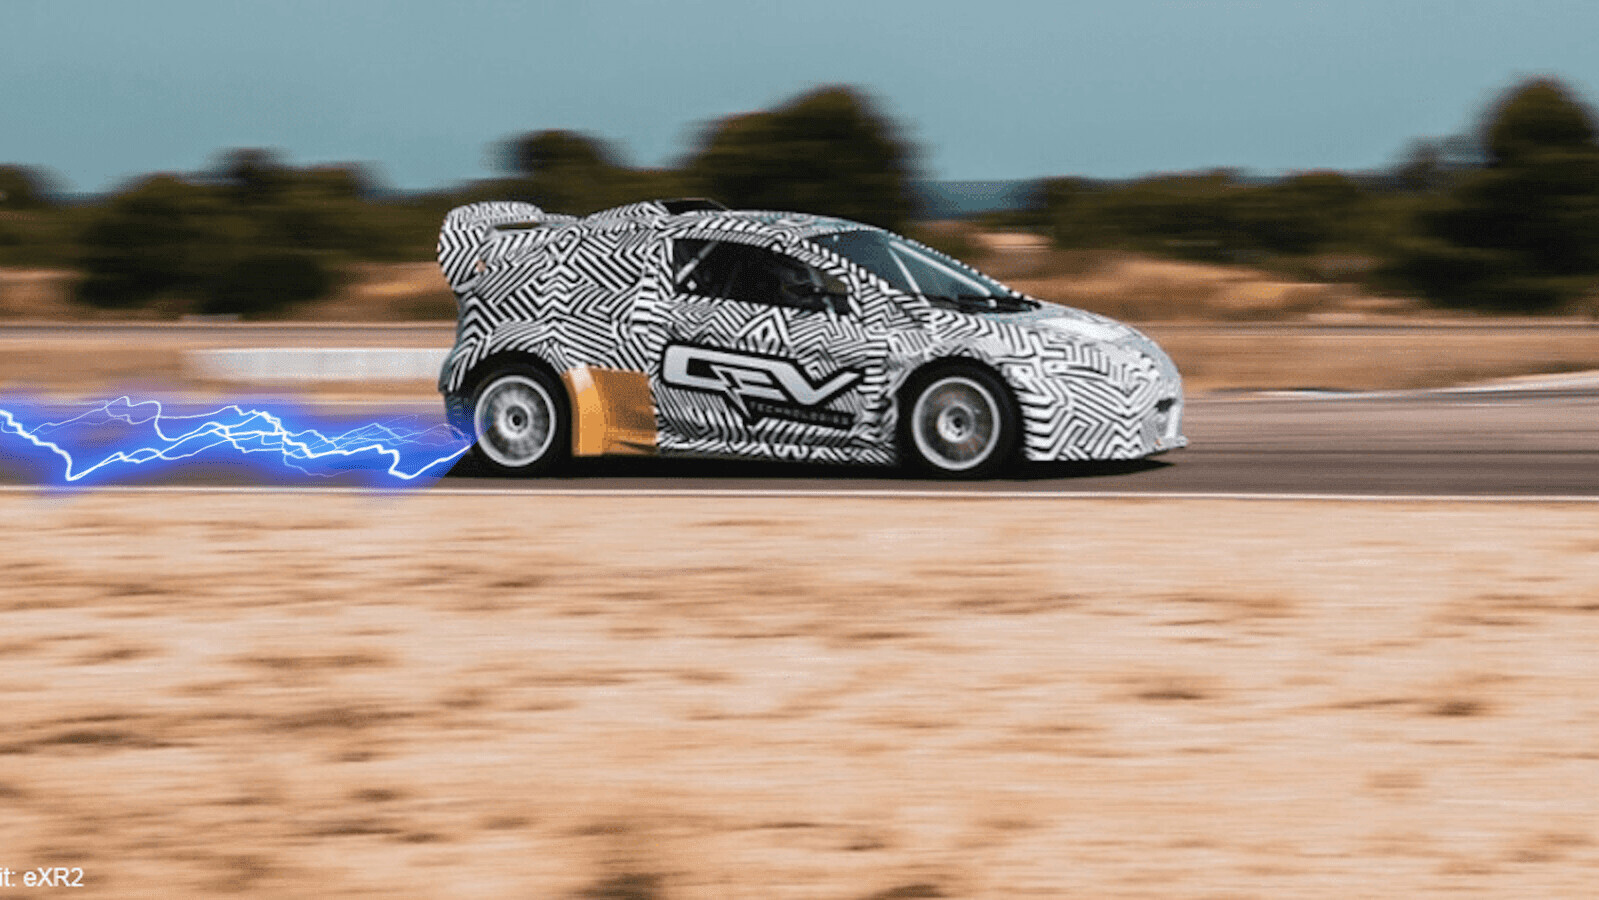 Rallycross is going electric in 2021 with a chaotic new race series across Europe